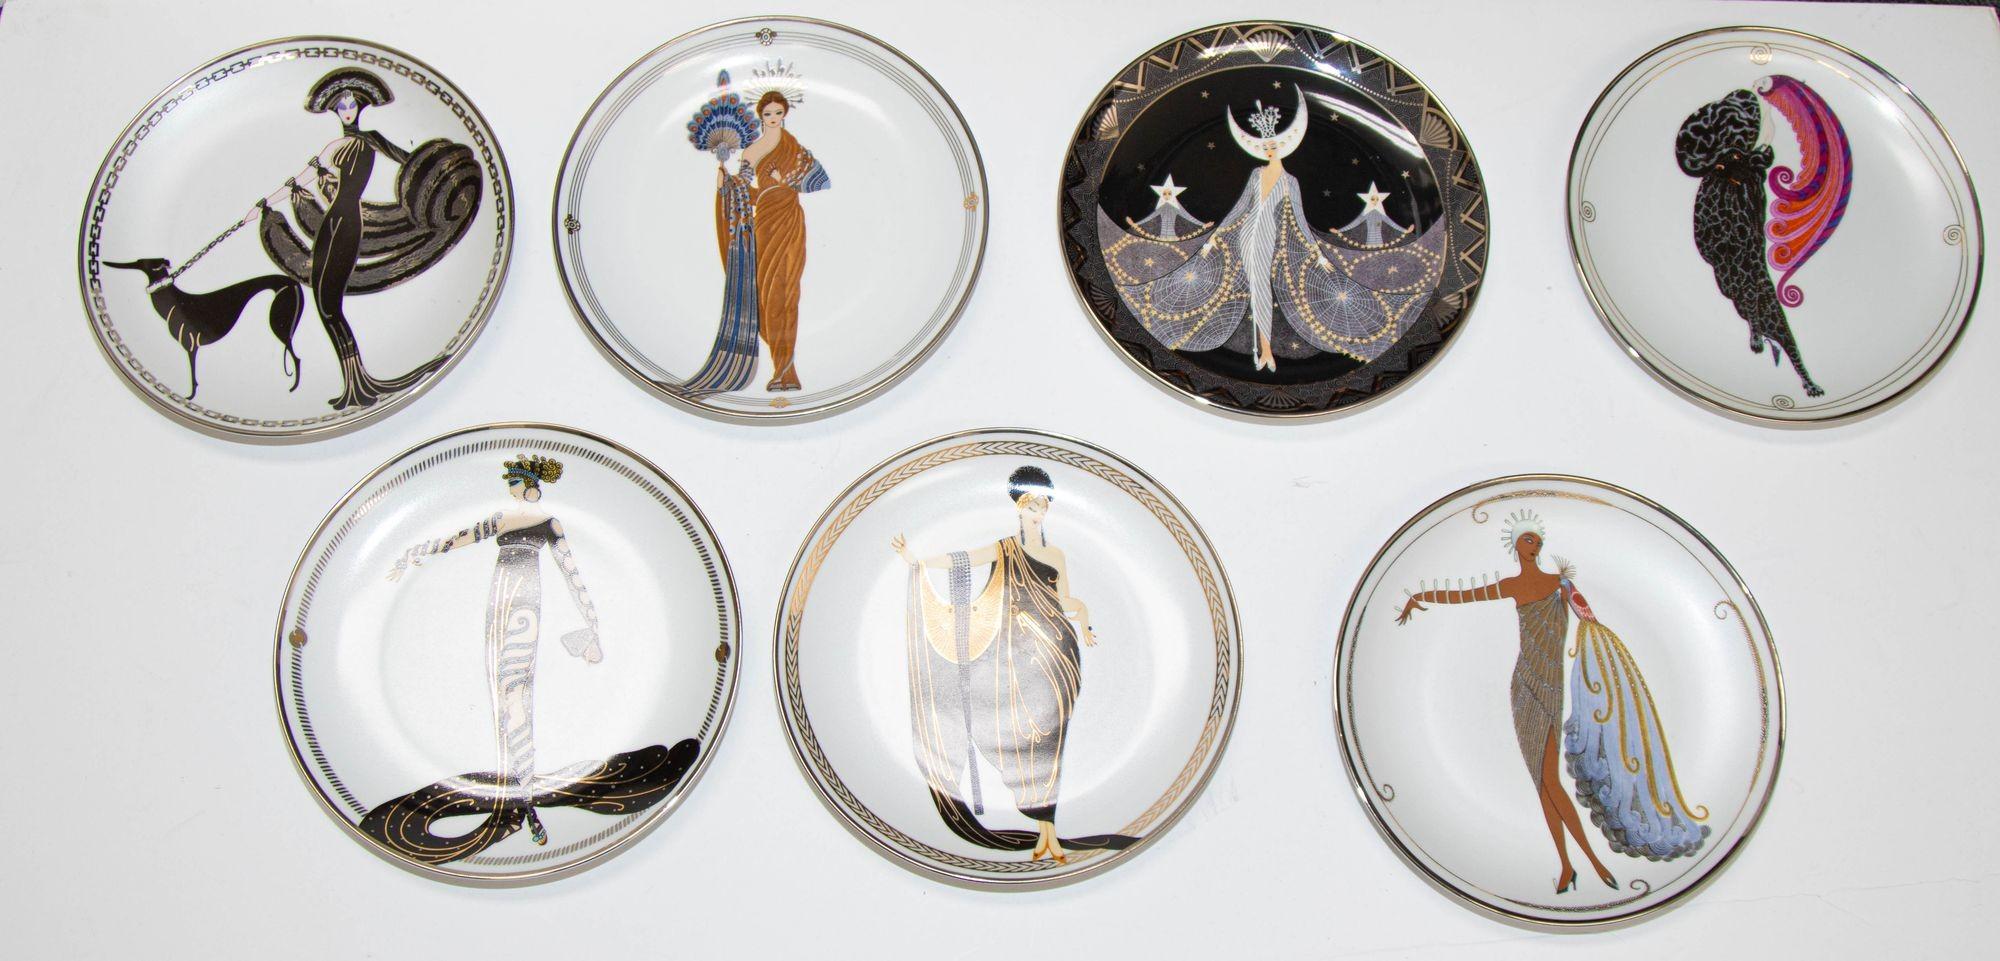 Royal Doulton House of Erté Plates Set of 7 Franklin Mint.
House of Erté  Royal Doulton Set of 7 Franklin Mint Porcelain Collector Decorative Plates, limited edition numbered.
House of Erte 8 inches decorative fine porcelain plates.
Here is a